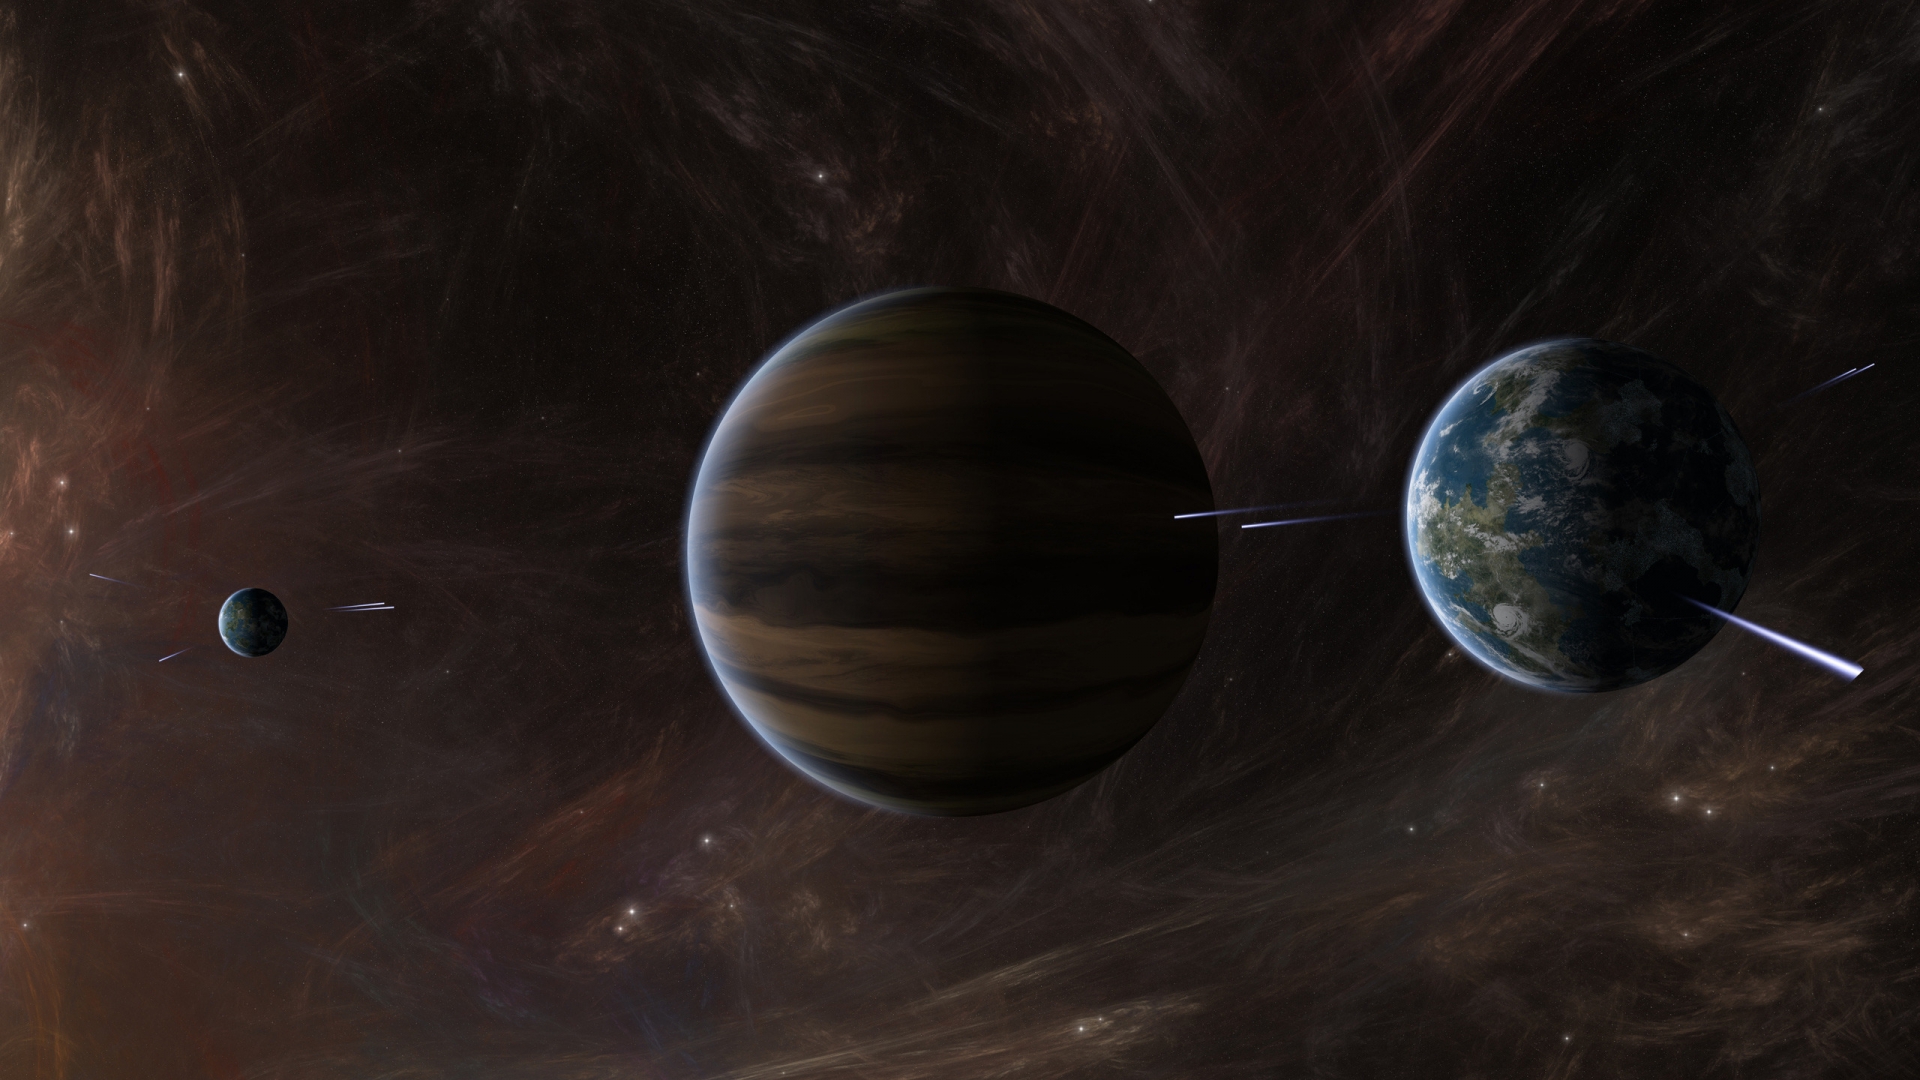 Space Planets Activity for 1920 x 1080 HDTV 1080p resolution